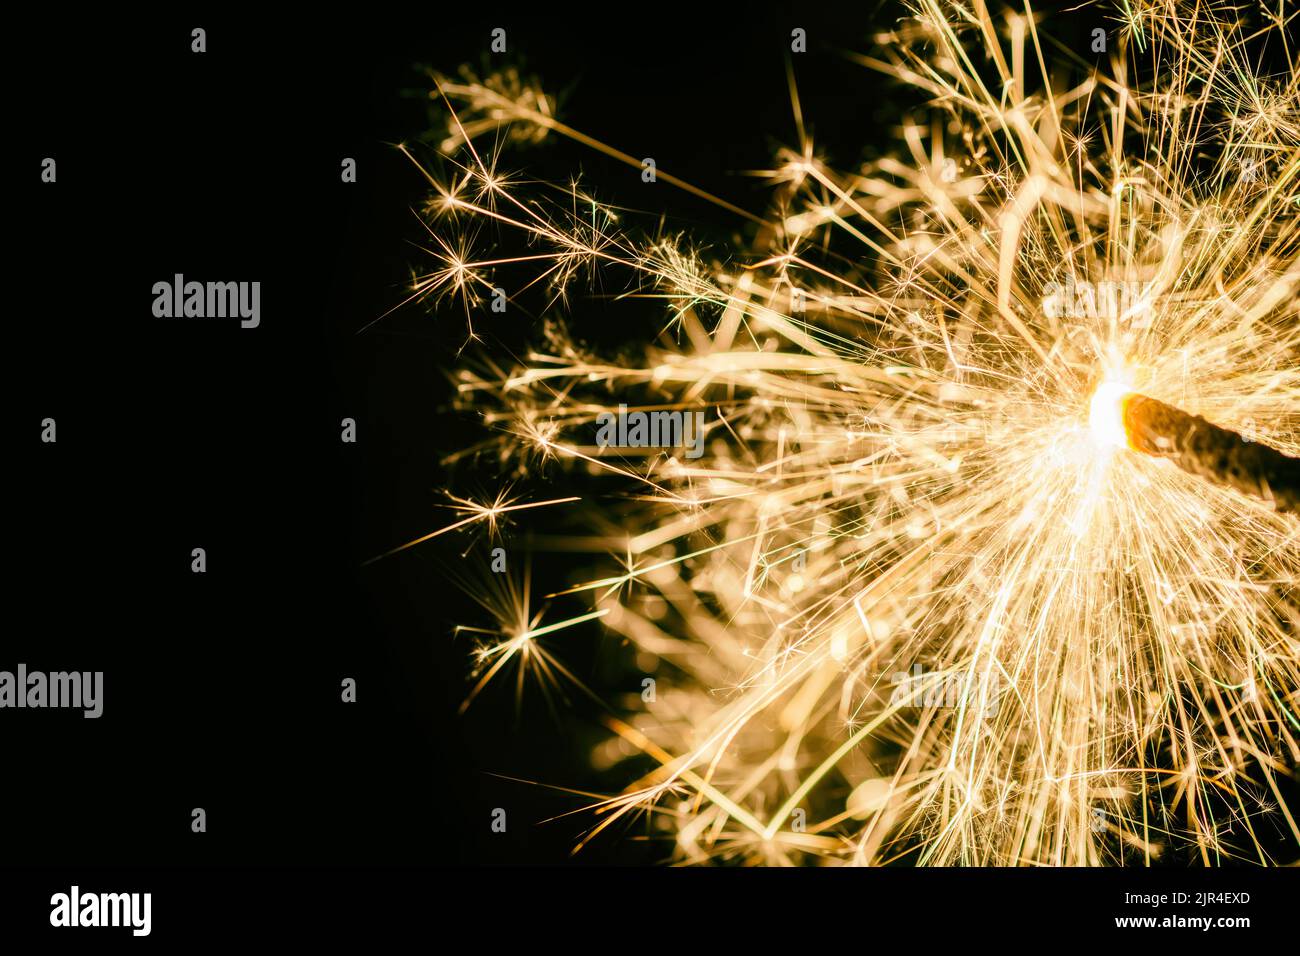 Sparkler as background on the theme of New Year's Eve Stock Photo